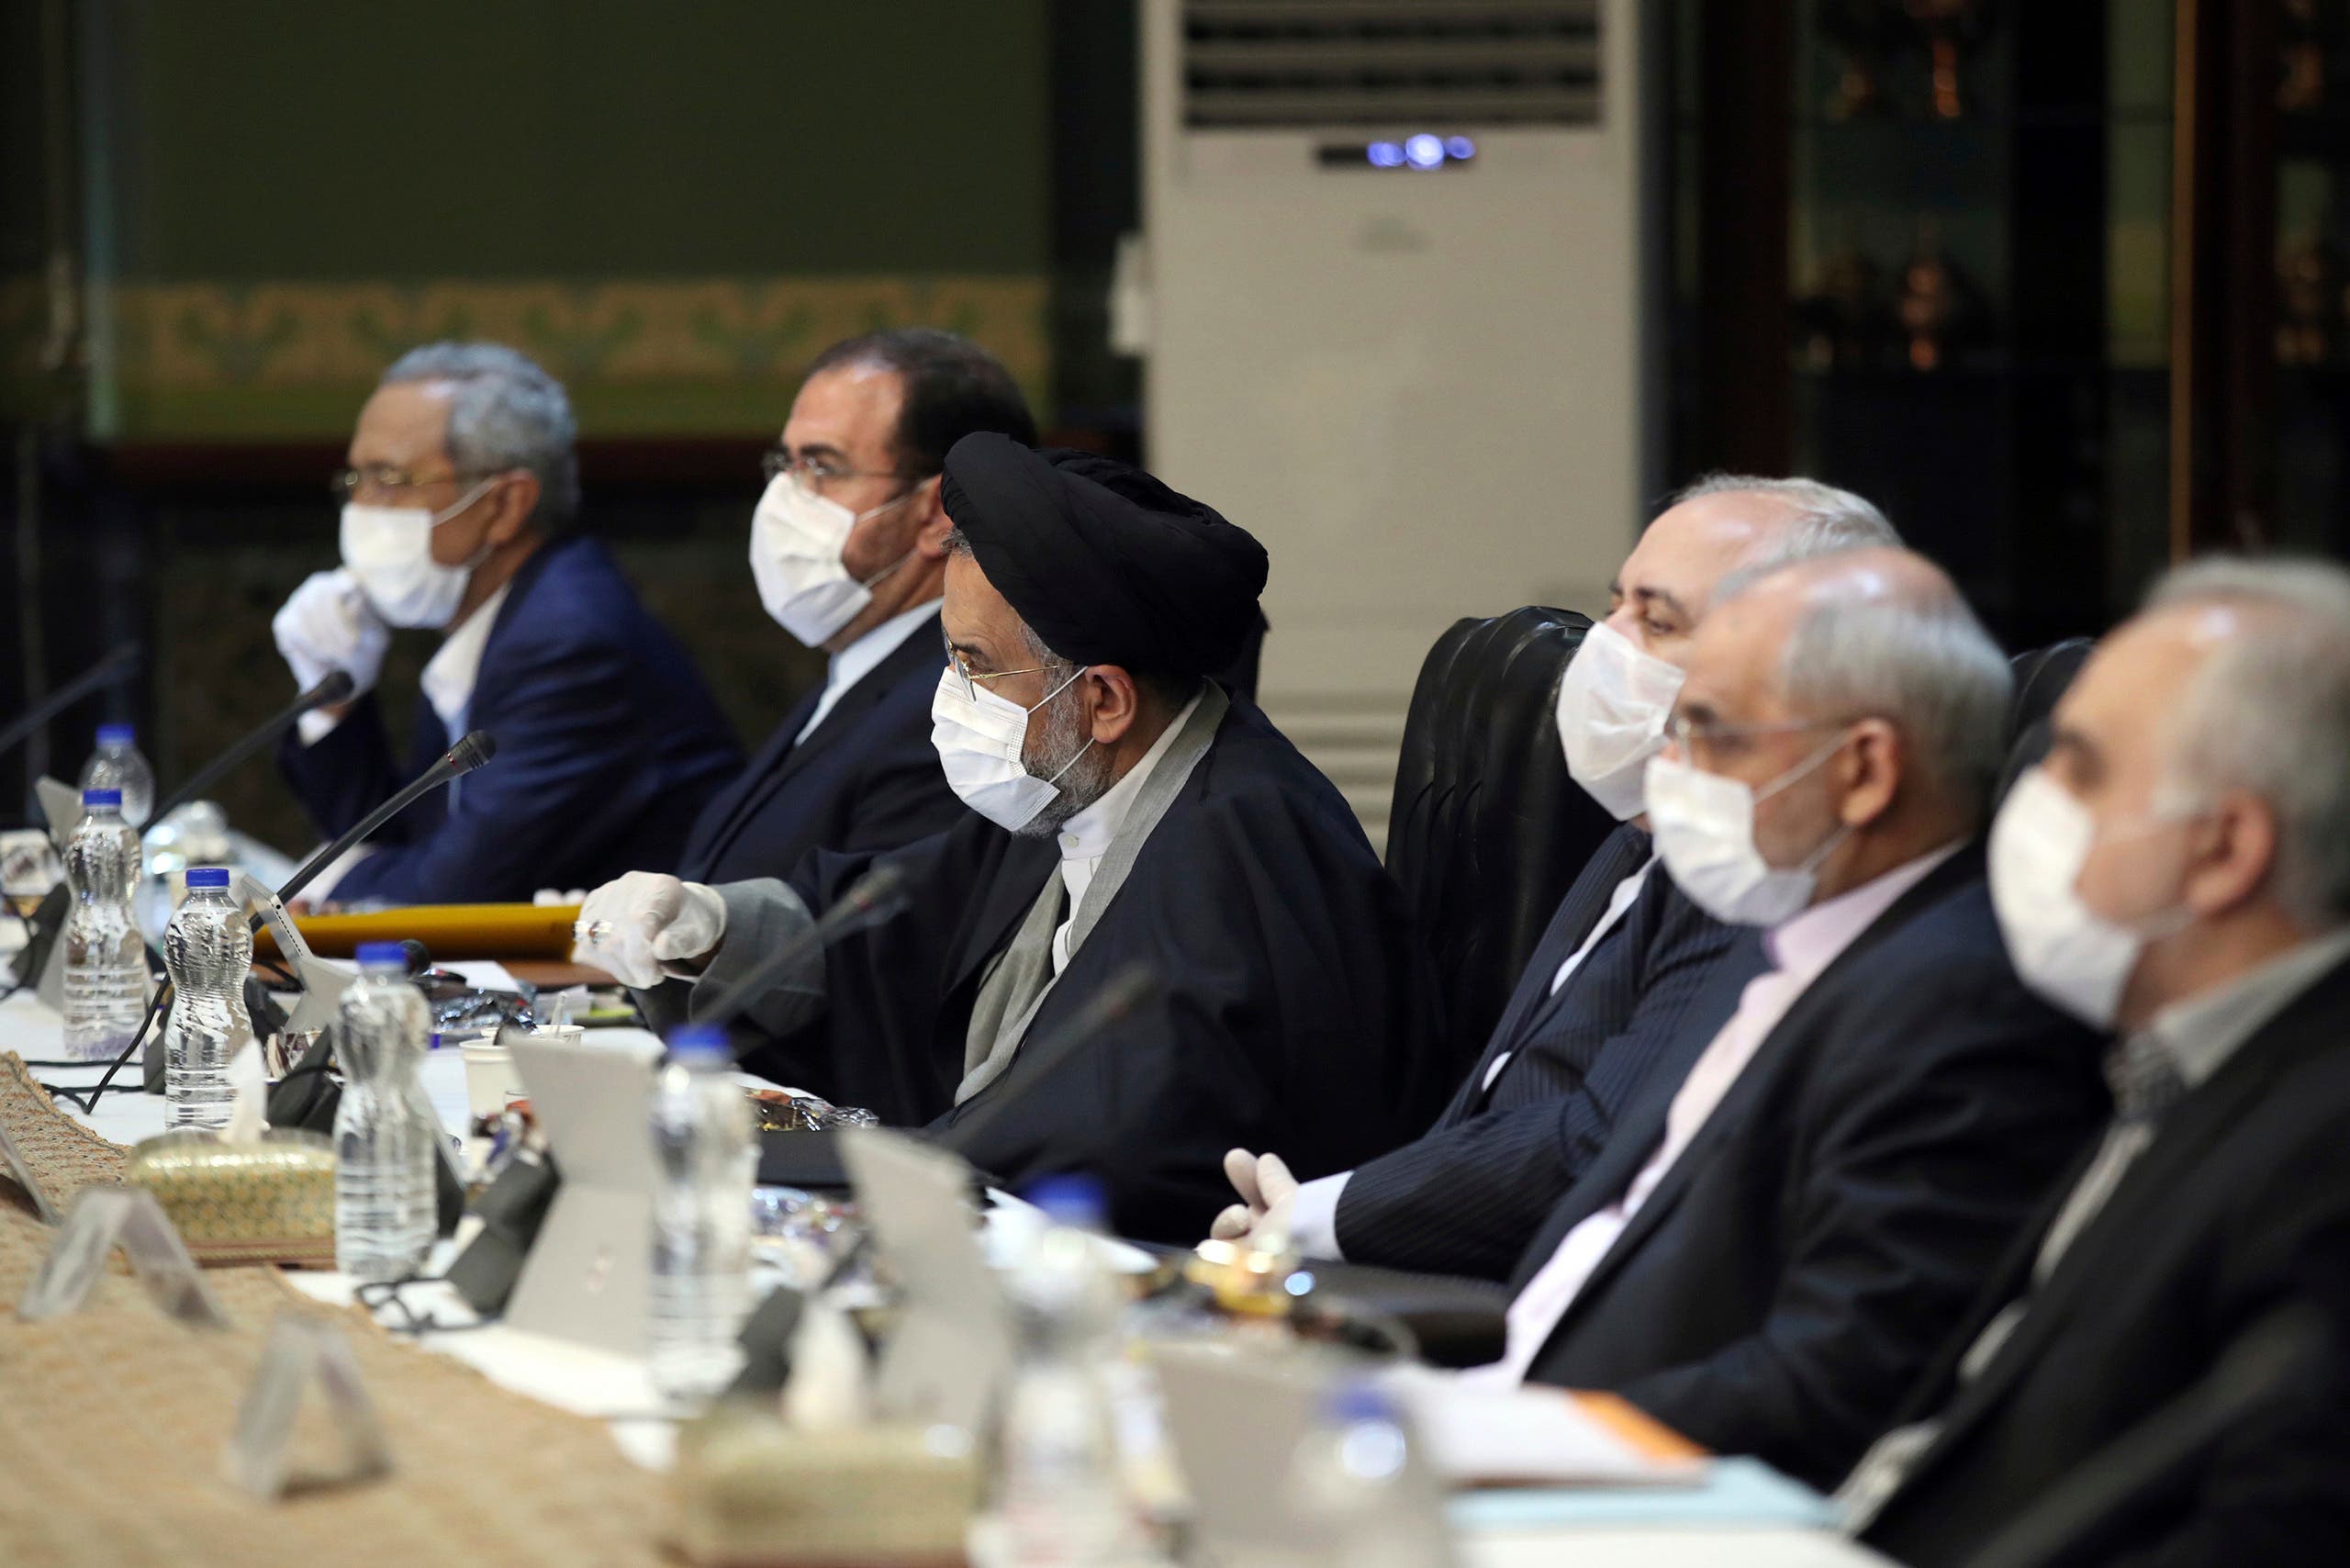 Iranian cabinet members wearing face masks and gloves attend their meeting in Tehran on March 18, 2020. (AP)